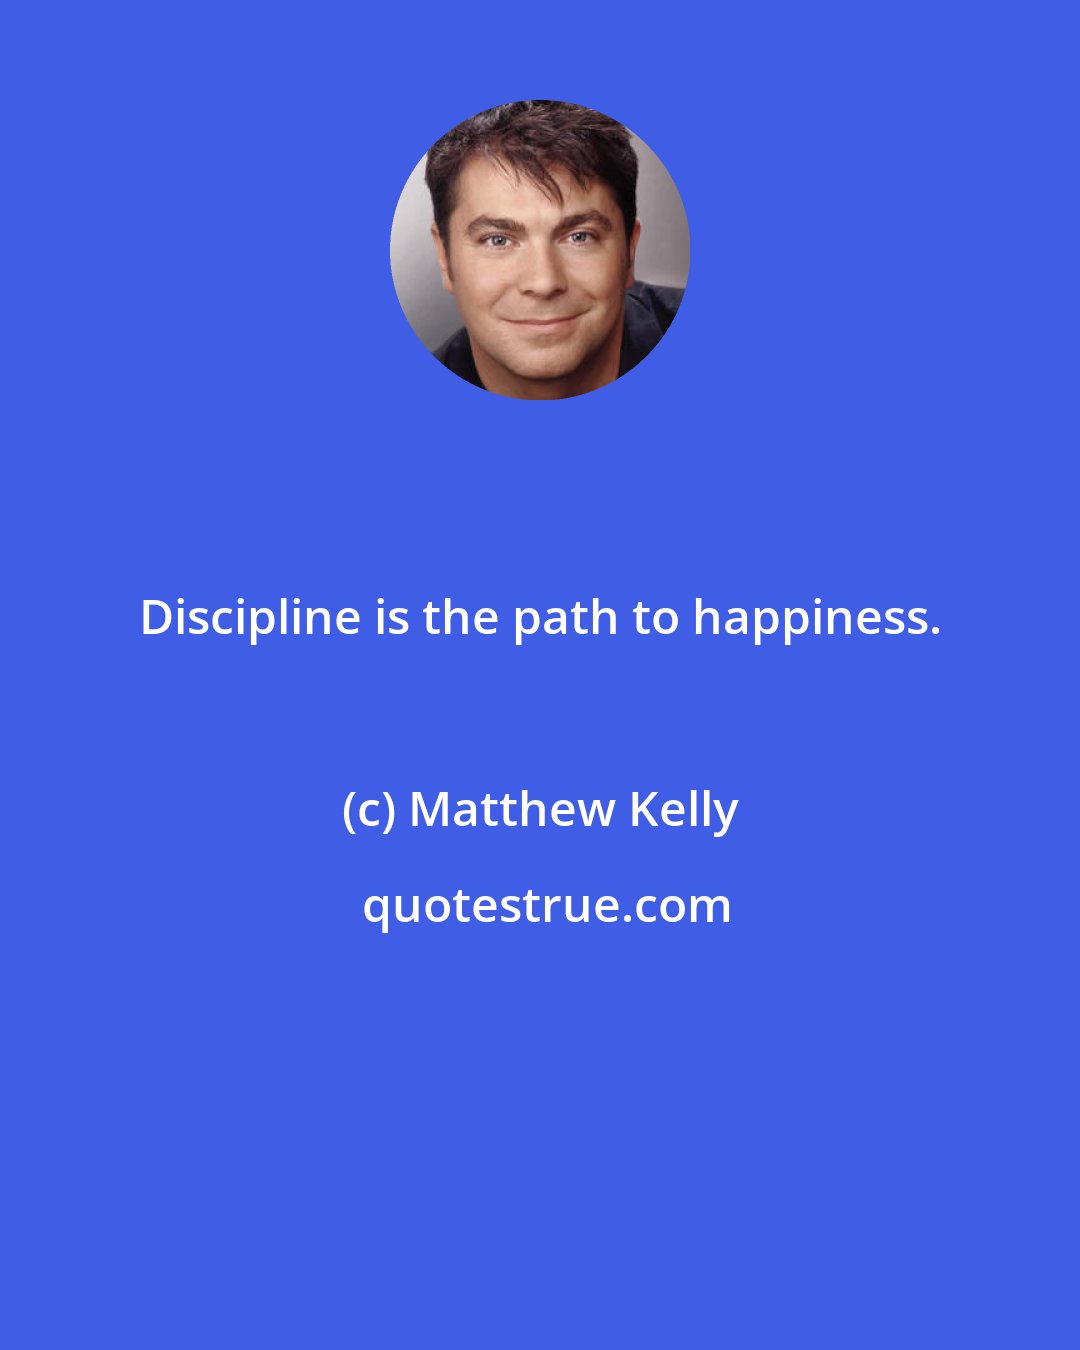 Matthew Kelly: Discipline is the path to happiness.